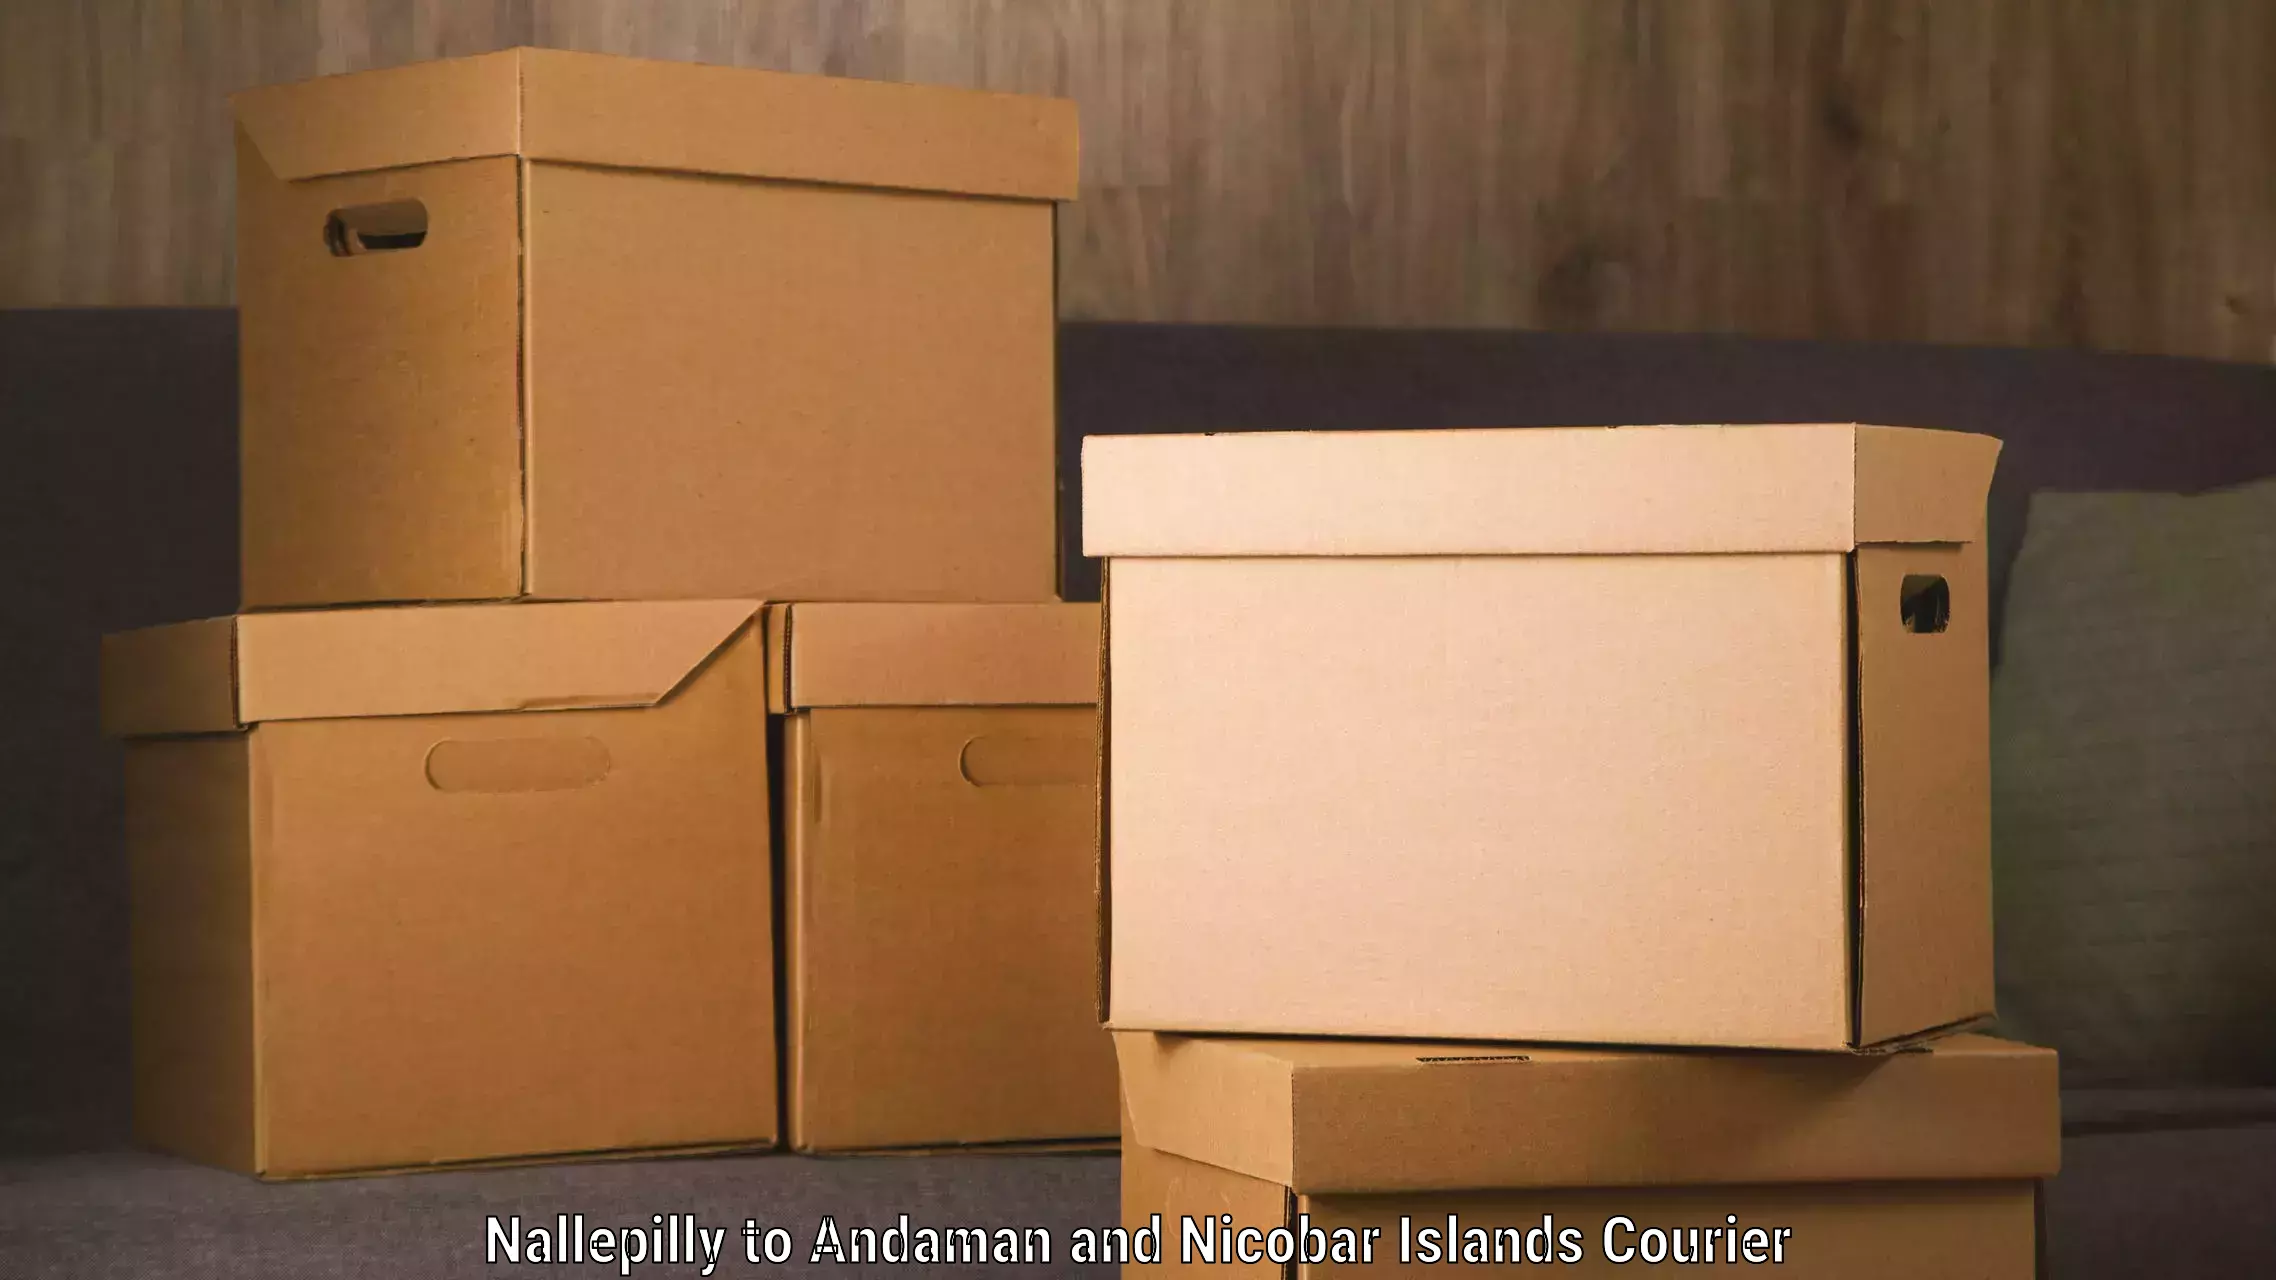 Efficient order fulfillment Nallepilly to Andaman and Nicobar Islands